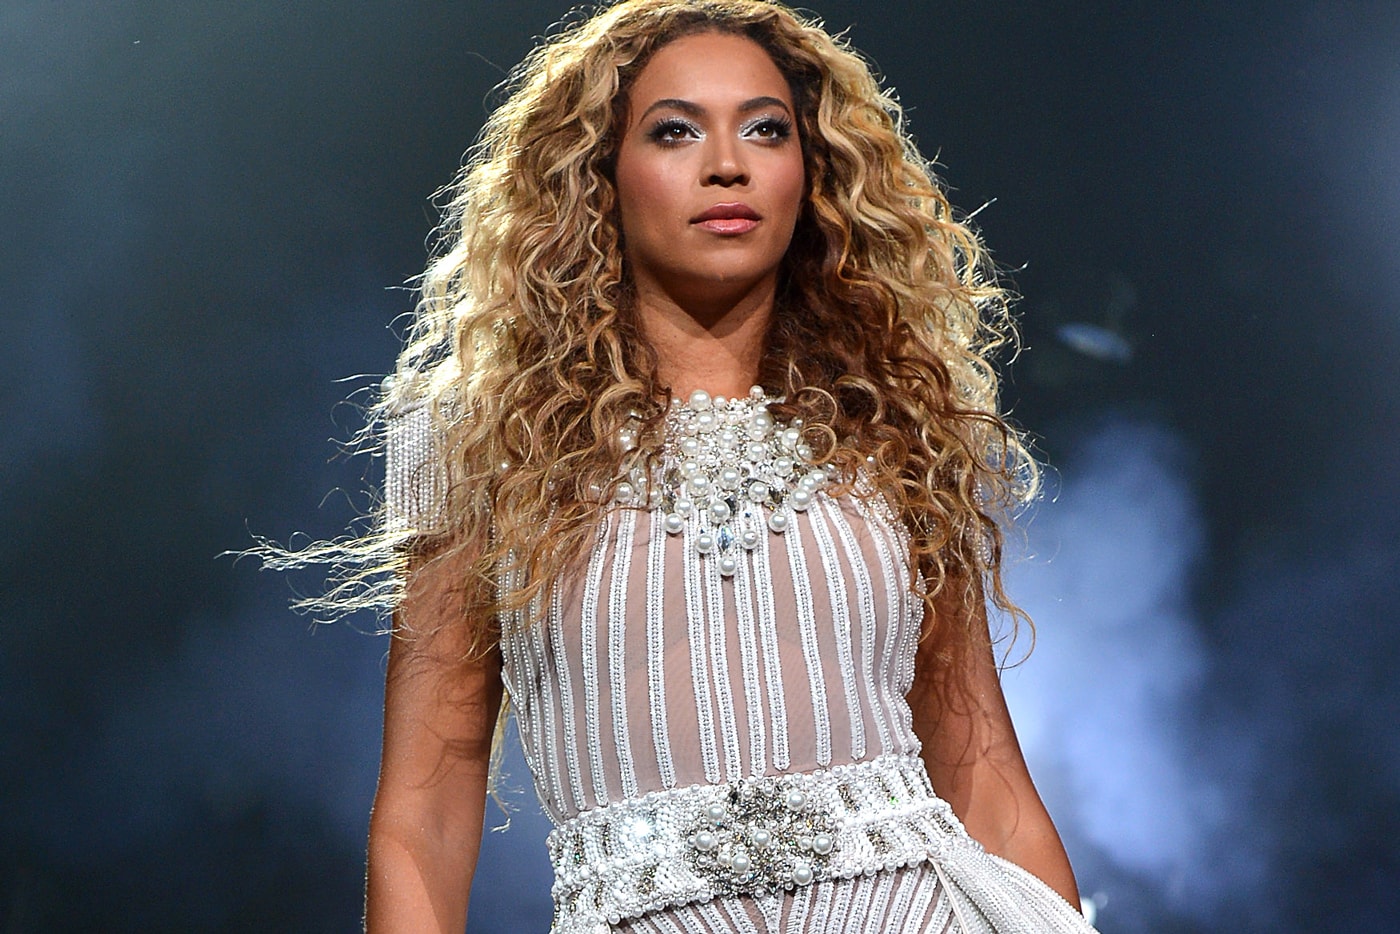 Beyoncé’s New Album is “Beyond Awesome”